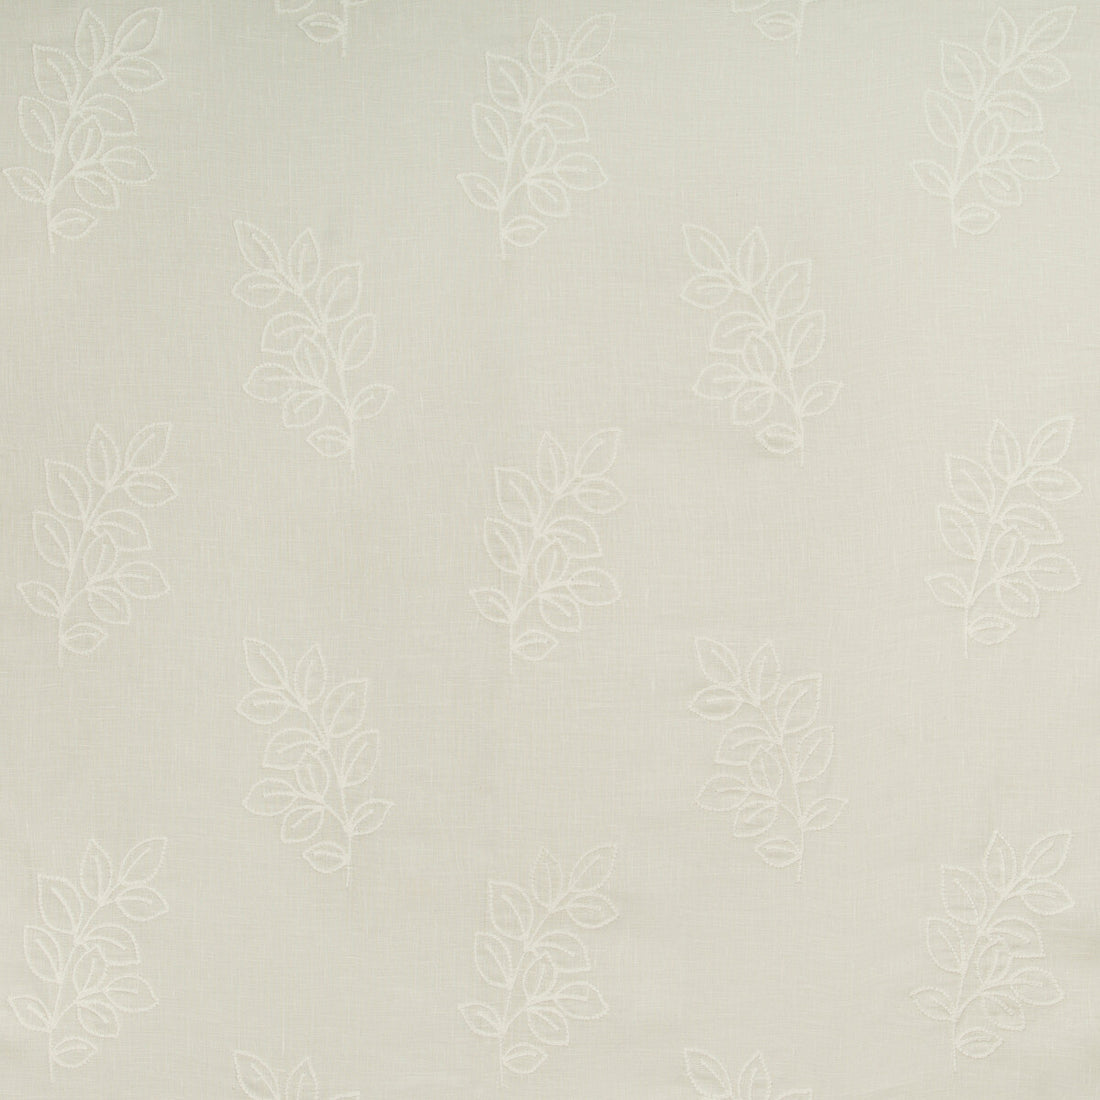 Leafstich fabric in ivory color - pattern 4634.1.0 - by Kravet Basics in the Bermuda collection